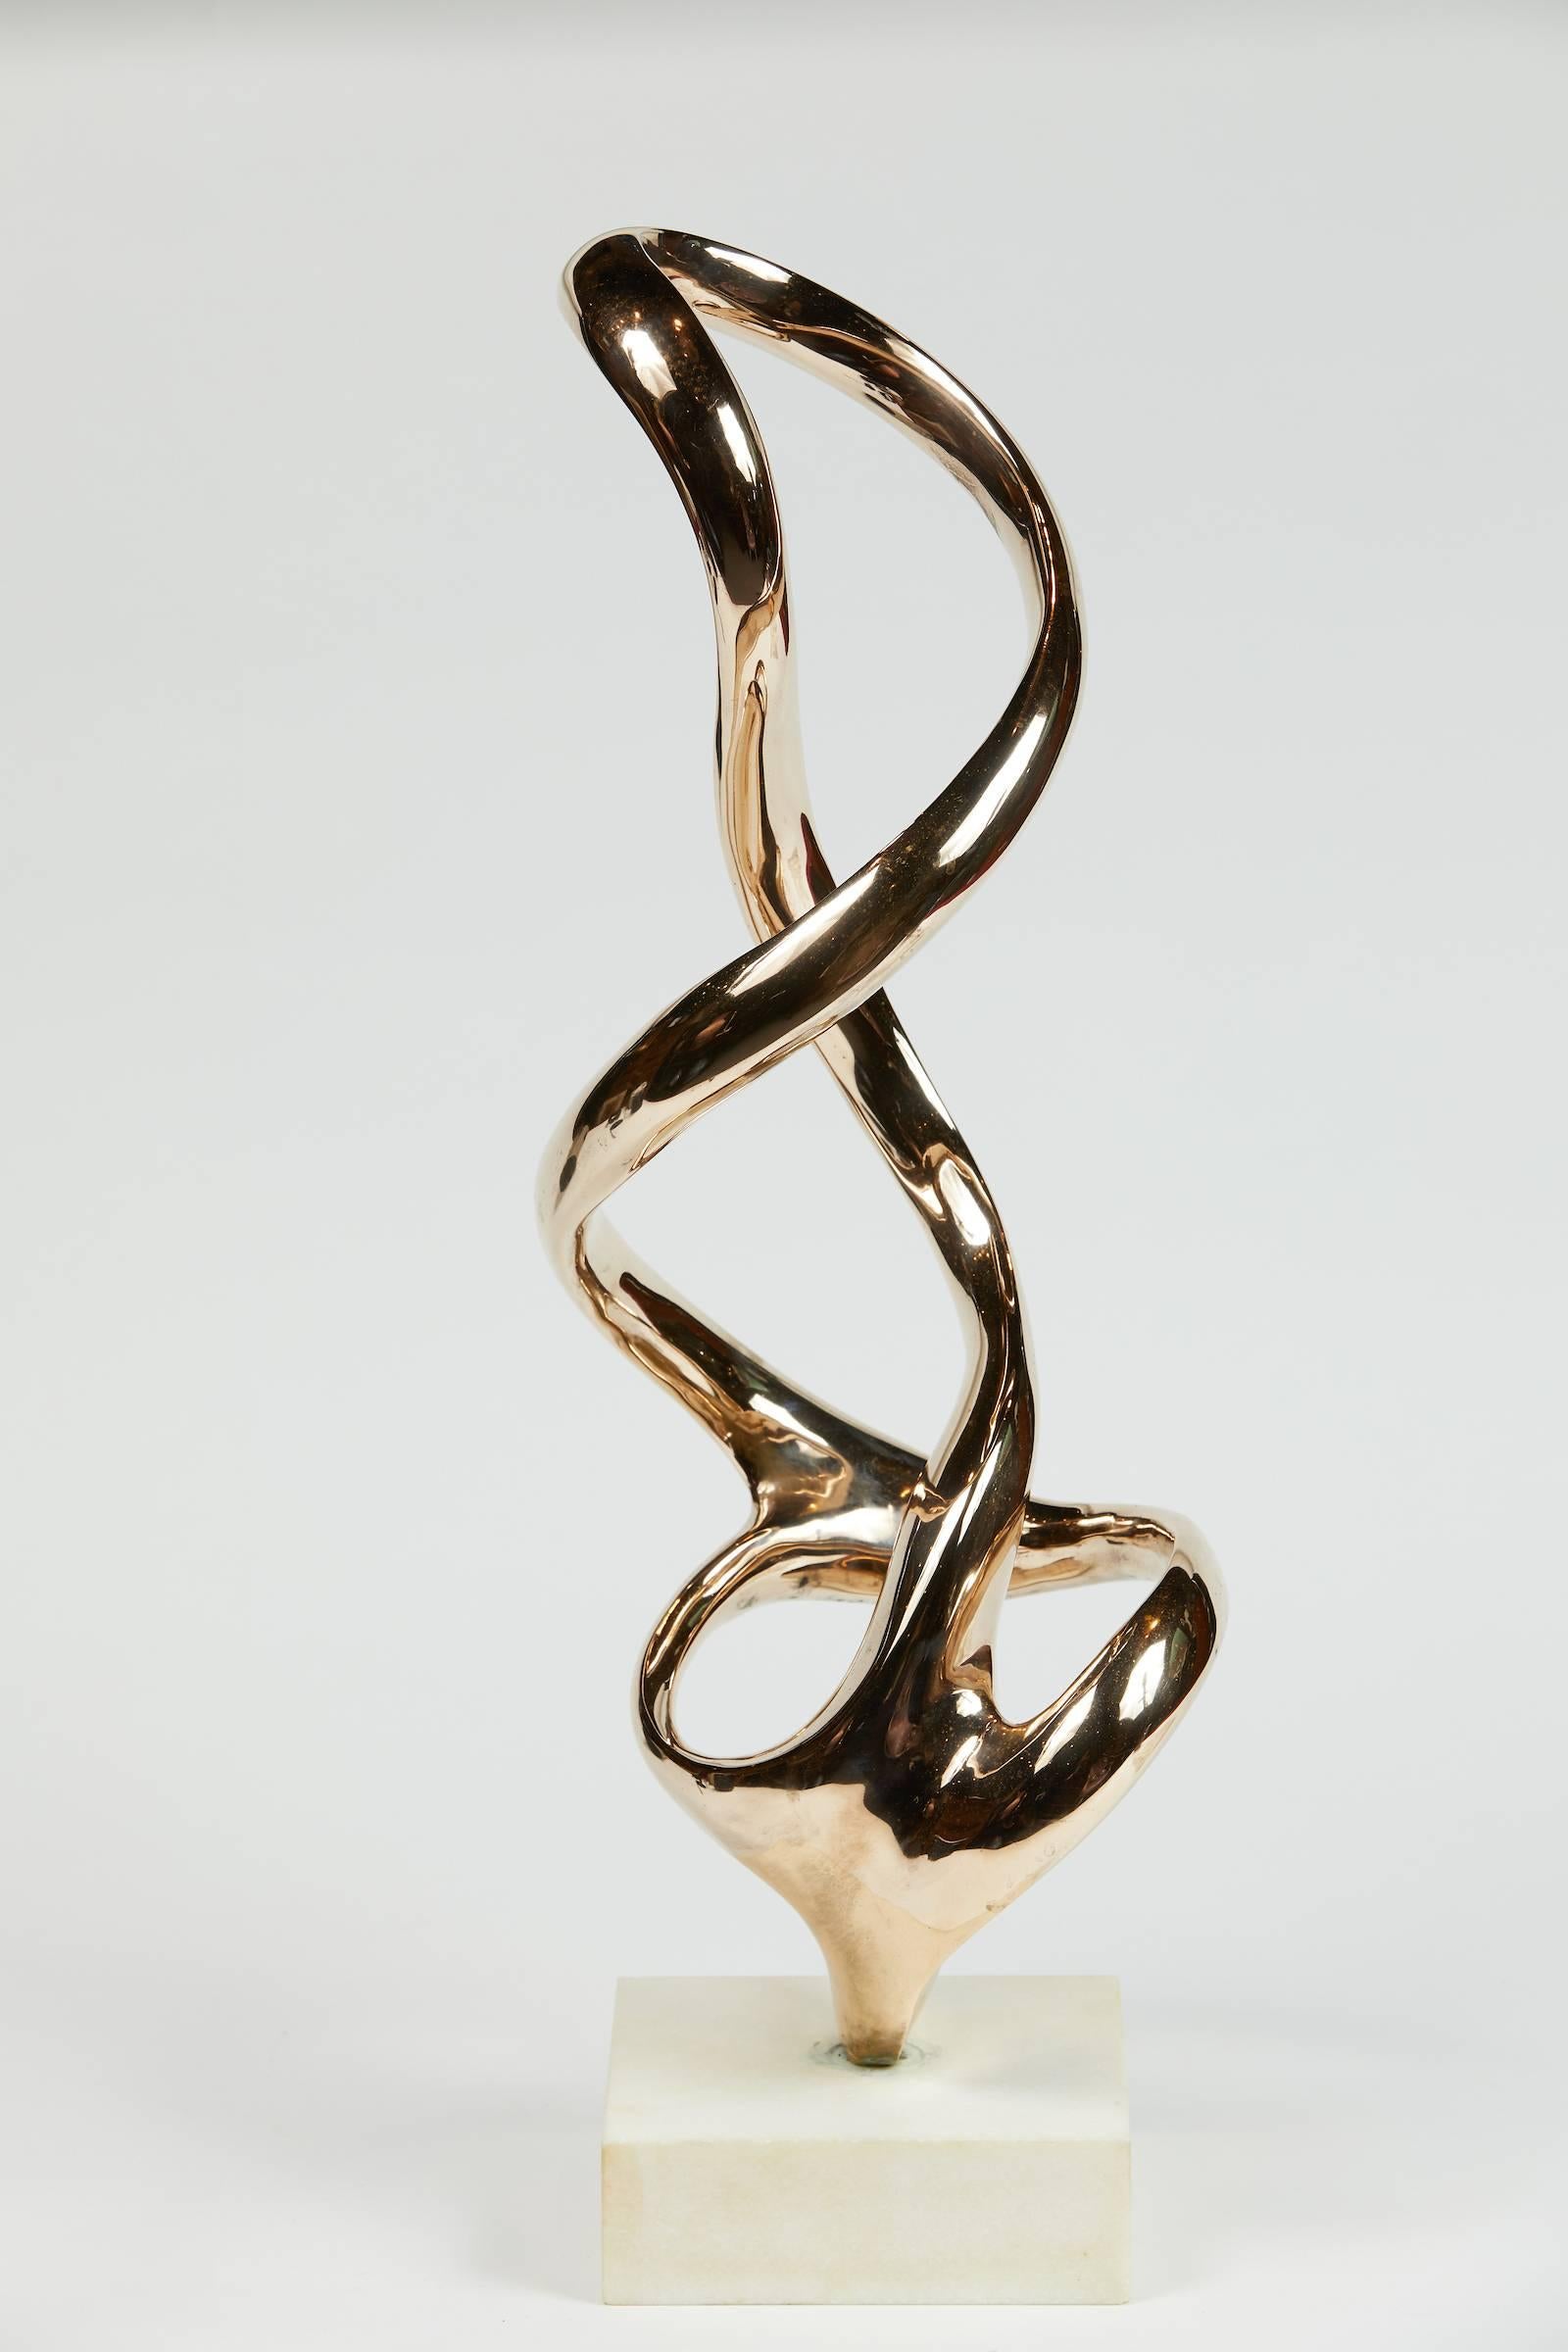 Late 20th Century Abstract Polished Bronze Sculpture by Kieff